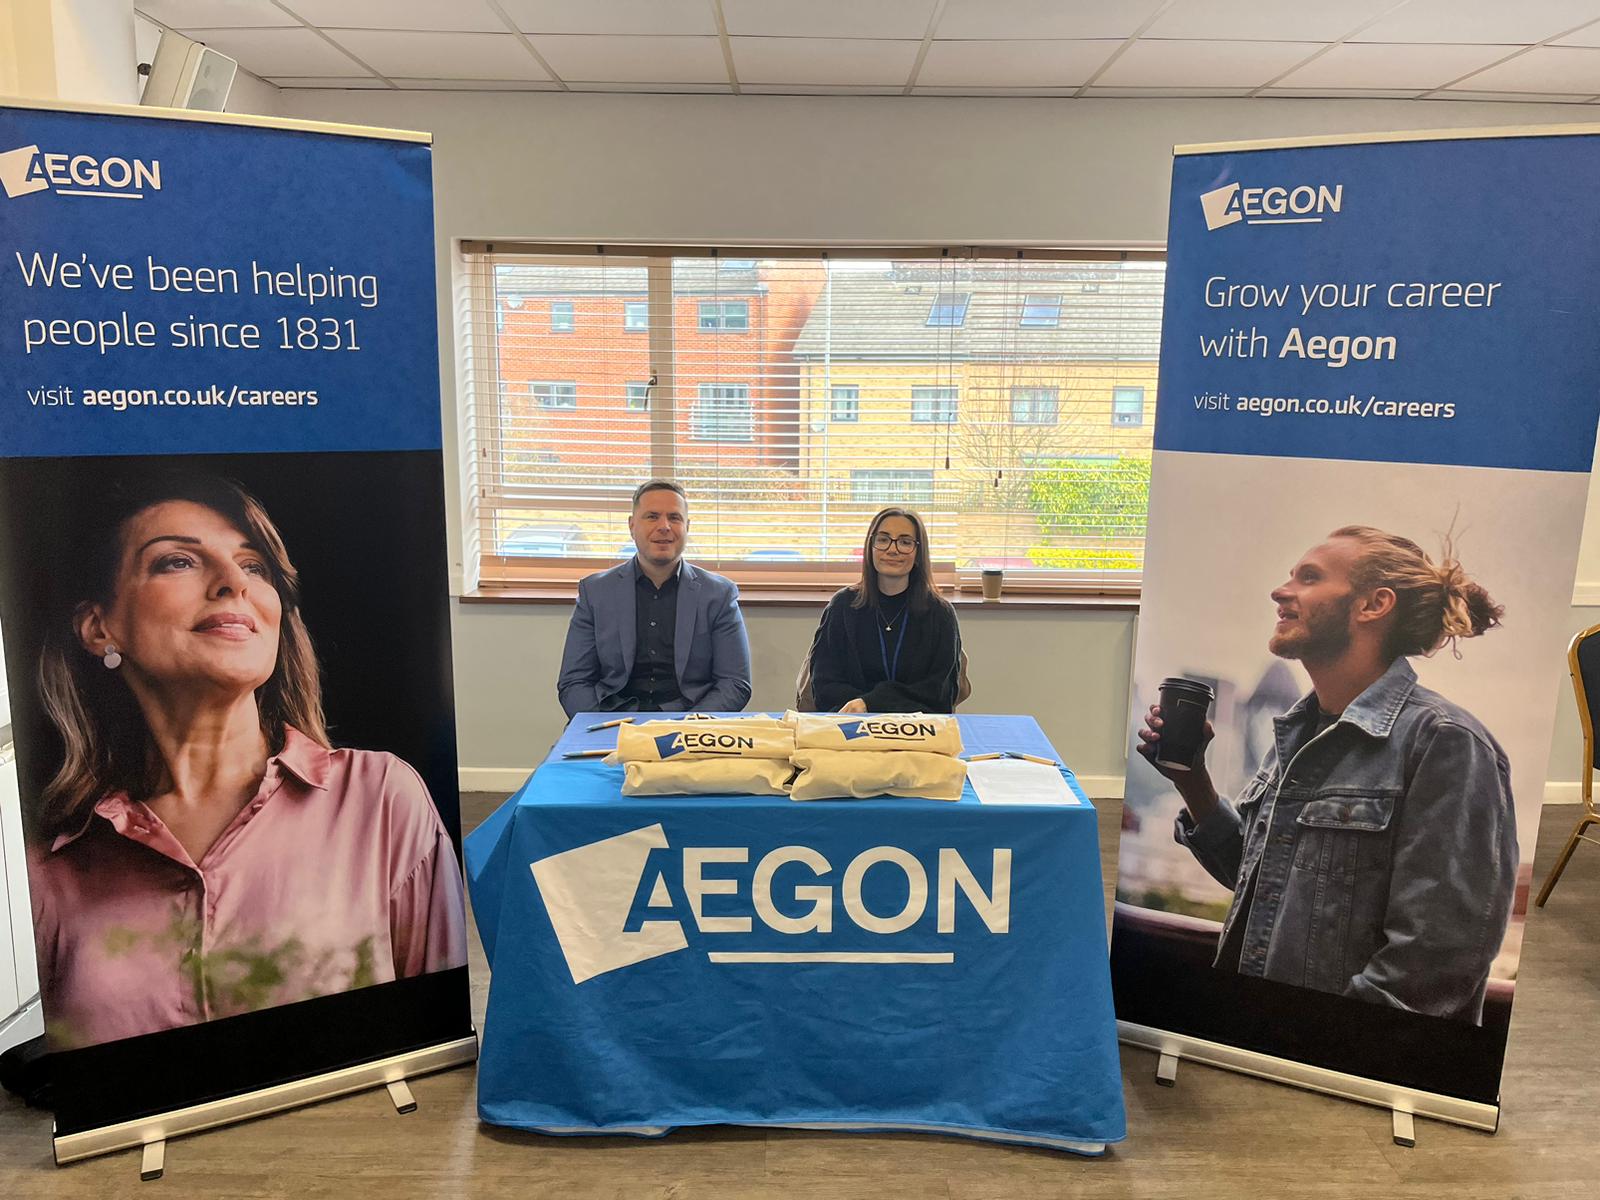 Aegon at our event in Peterborough